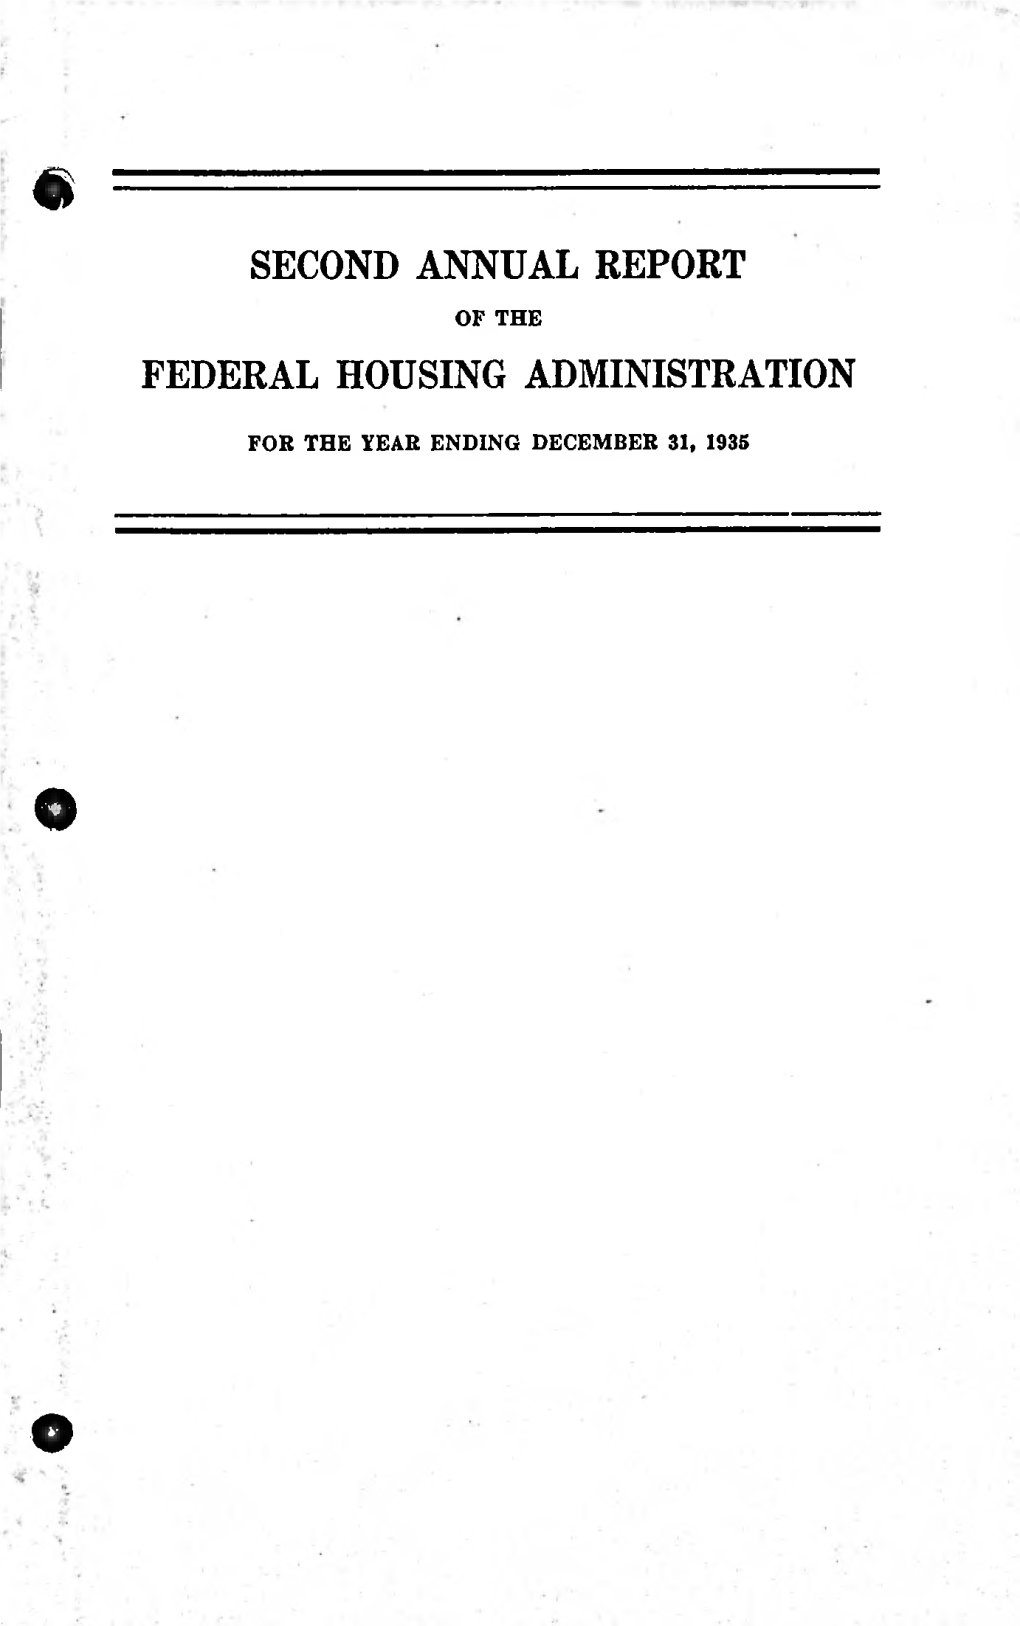 Second Annual Report of the Federal Housing Administration